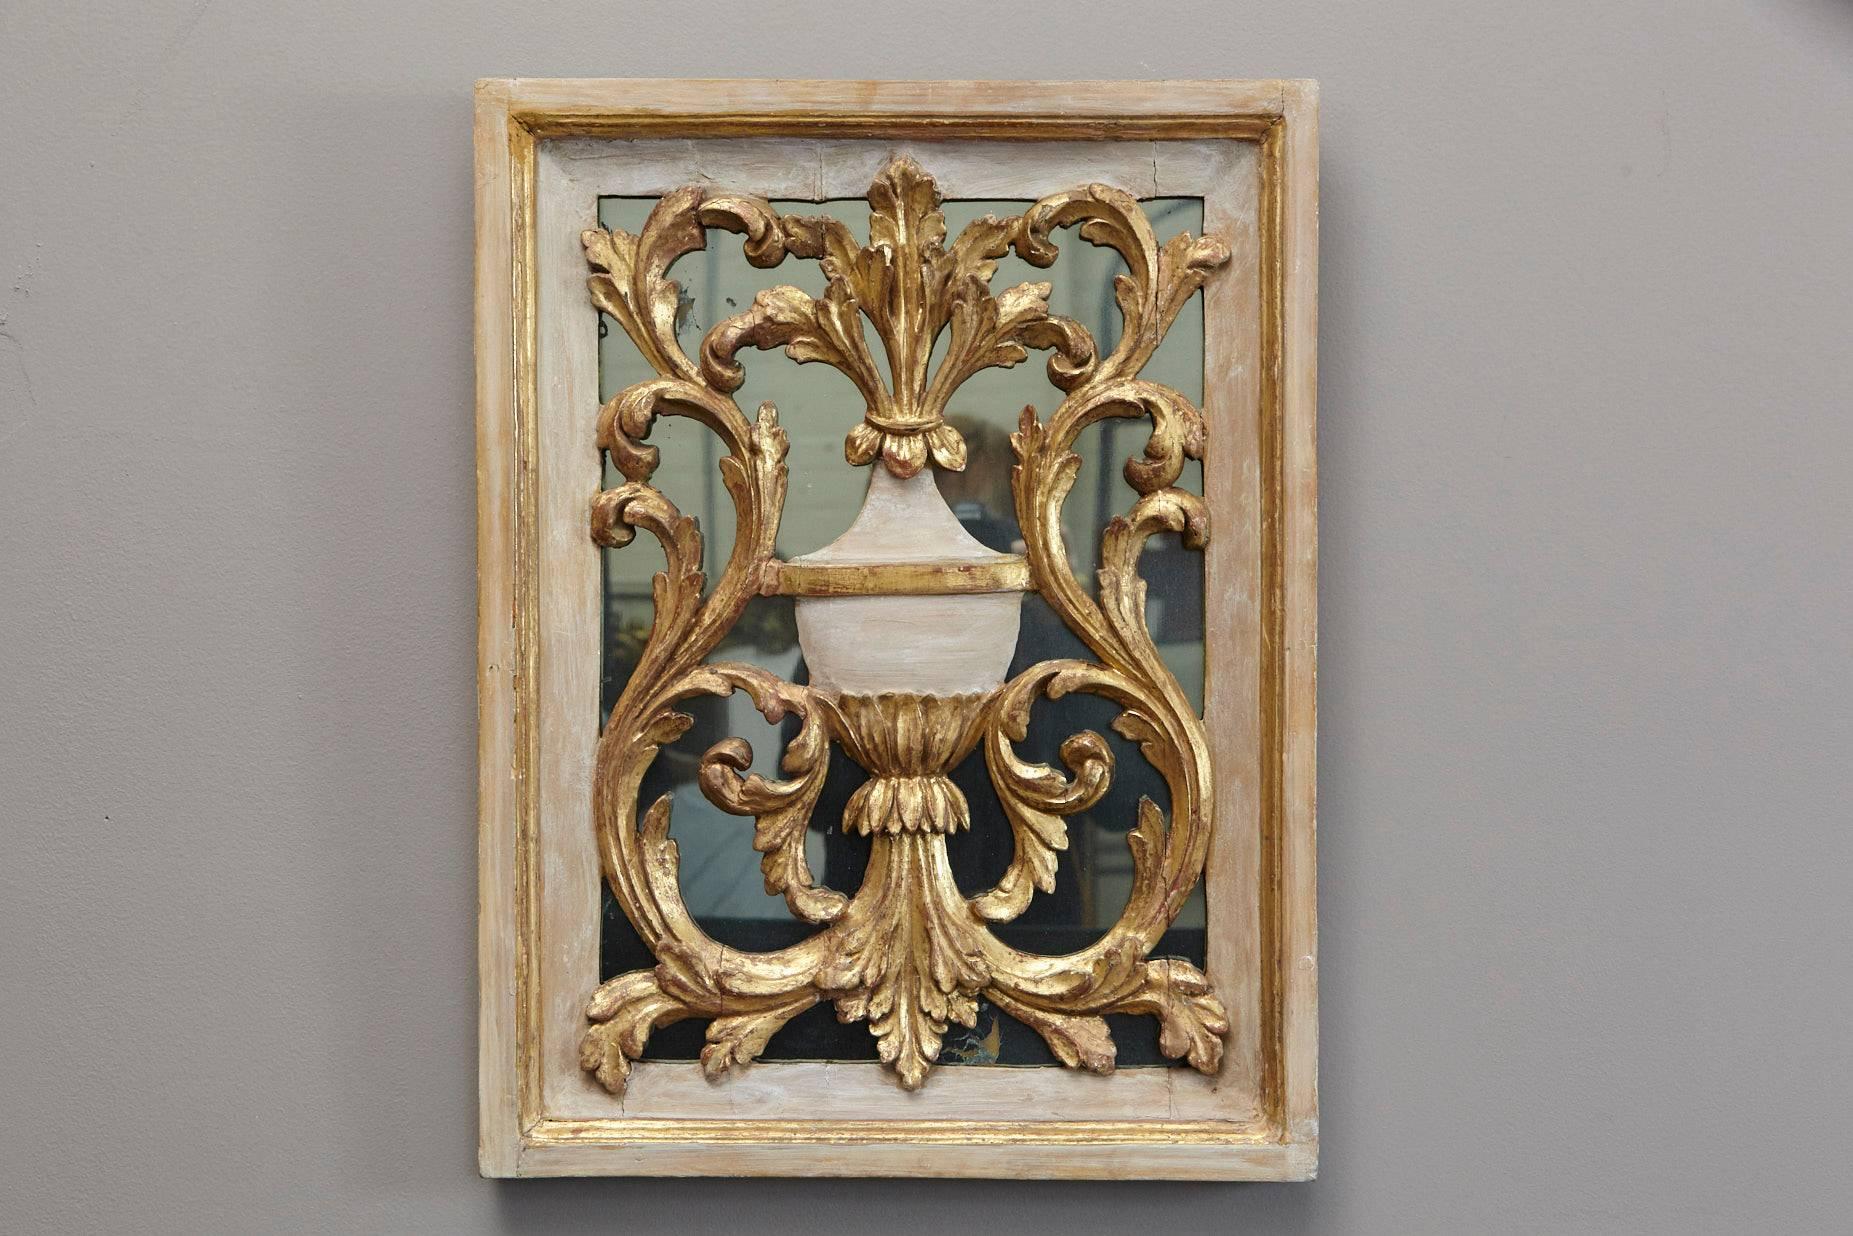 Gorgeous 19th century Venetian style painted and gilded carved wood mirror back panel.
Some restorations have been done to the gesso, beautiful patina. Original mirror glass.